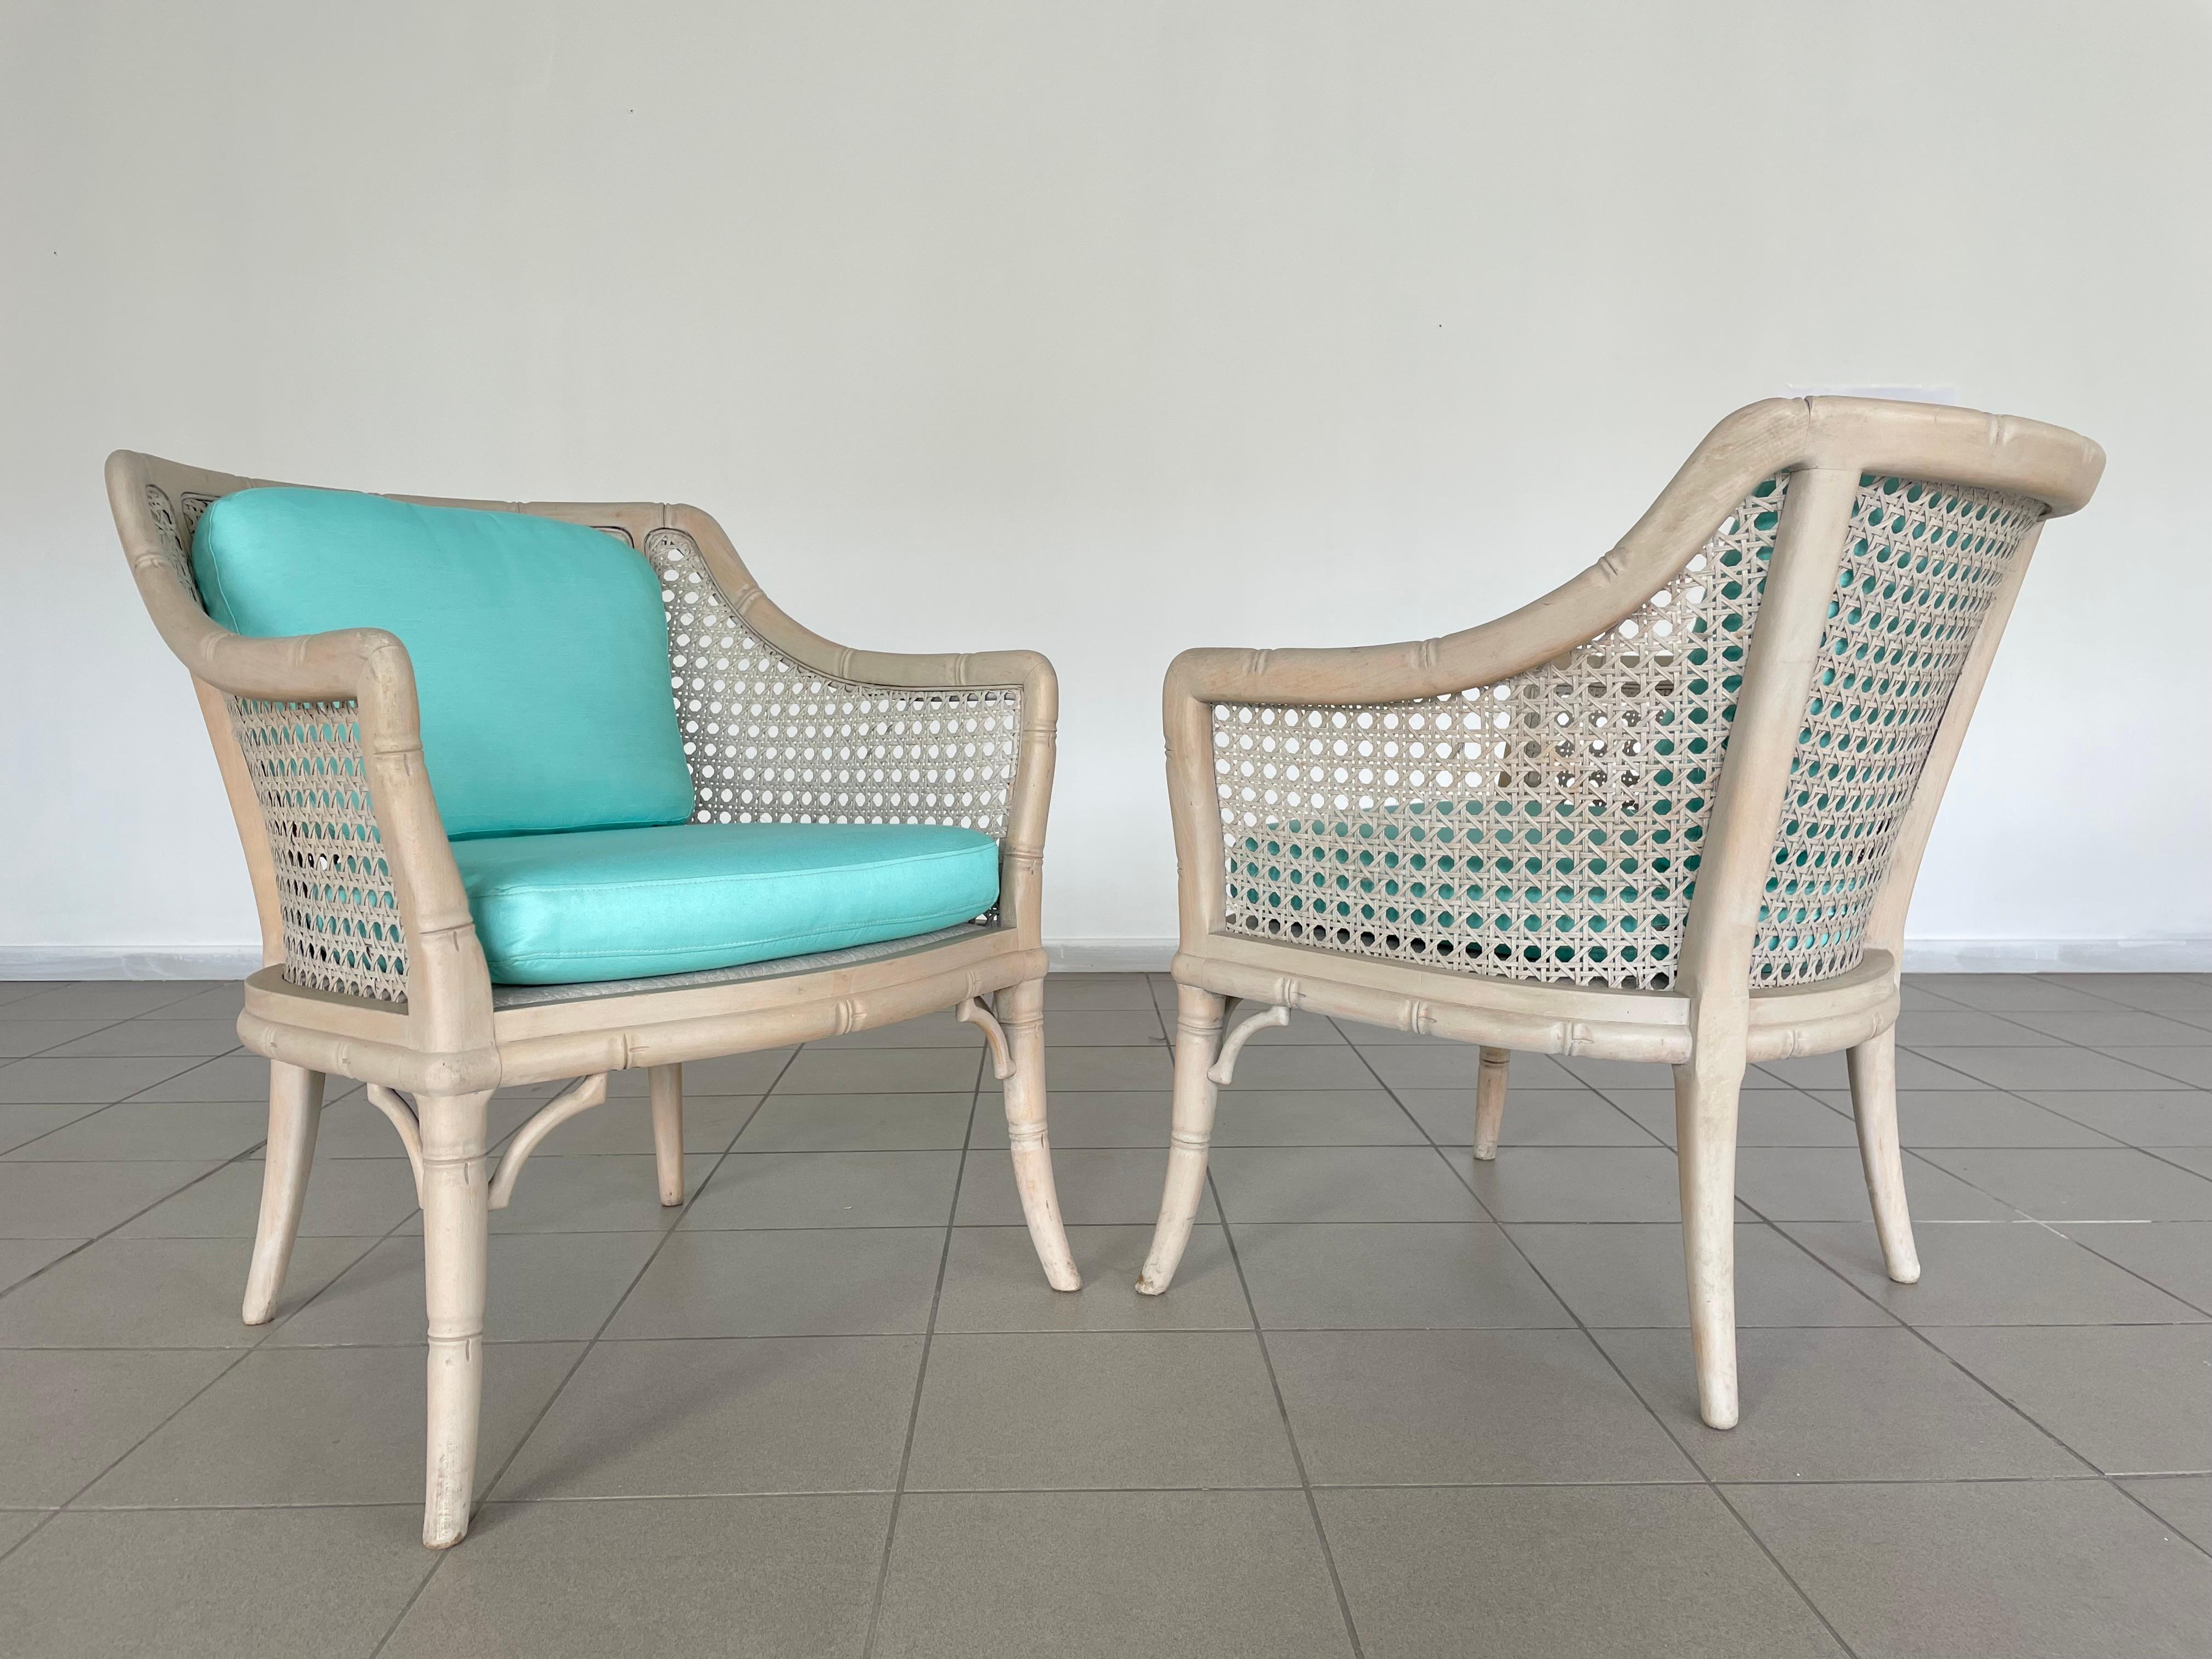 Fabric Mid-Century Modern French Riviera Cane Bamboo Armchairs 1960s, Newly Upholstered